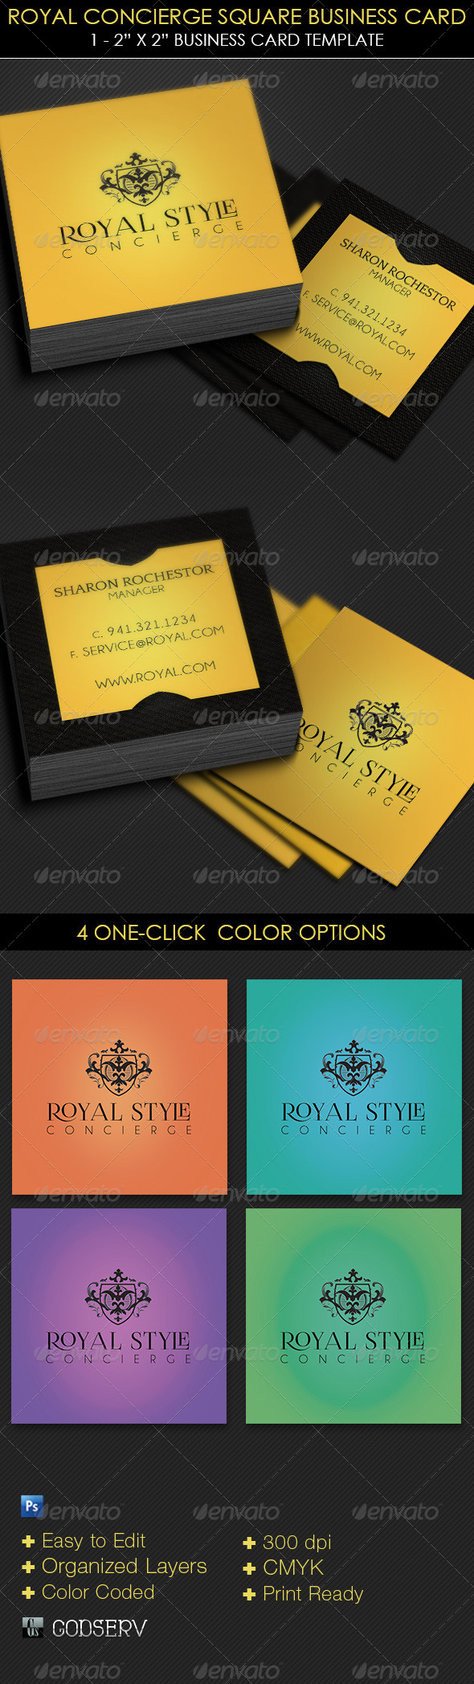 Royal Concierge Square Business Card Template by Godserv